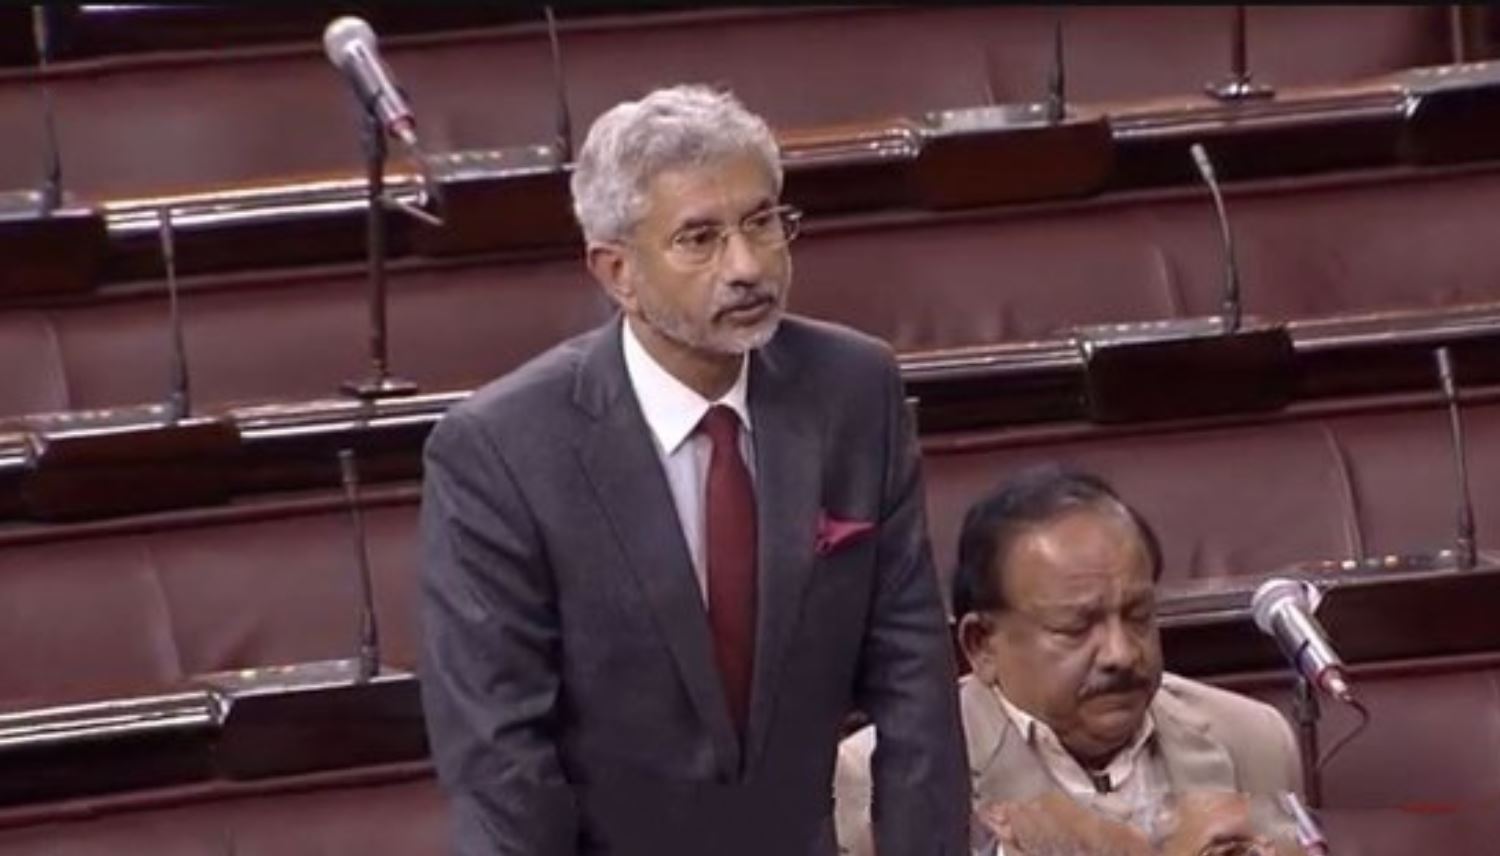 India offered to evacuate corona-hit from Wuhan for all neighbours: Jaishankar